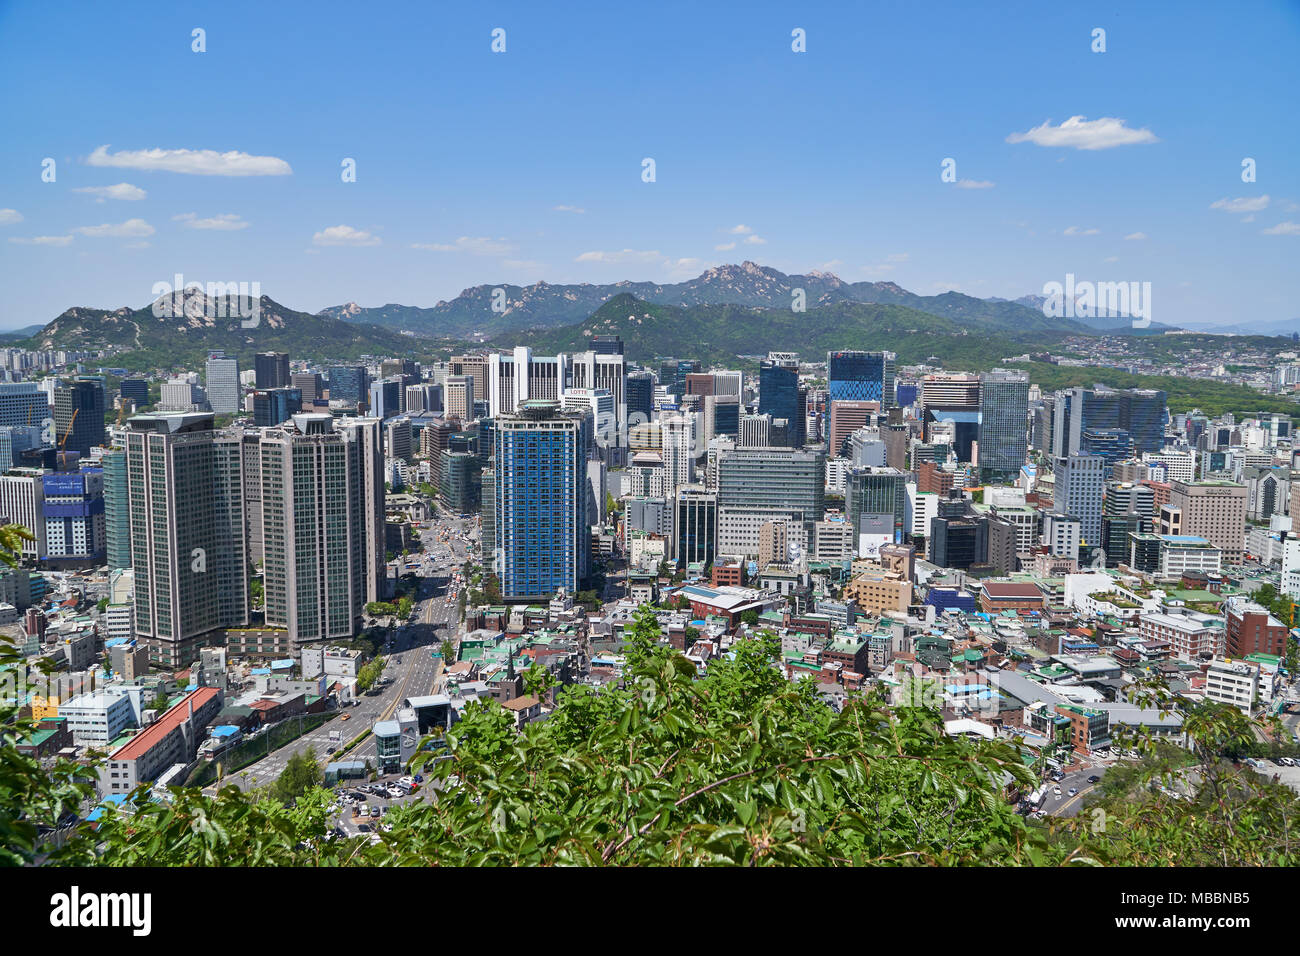 Seoul, Korea - April 26, 2017:  Cityscape of Hoehyeon-dong. Hoehyeon-dong in Junggu is a central area of Seoul. The view is from Namsan mountain obser Stock Photo